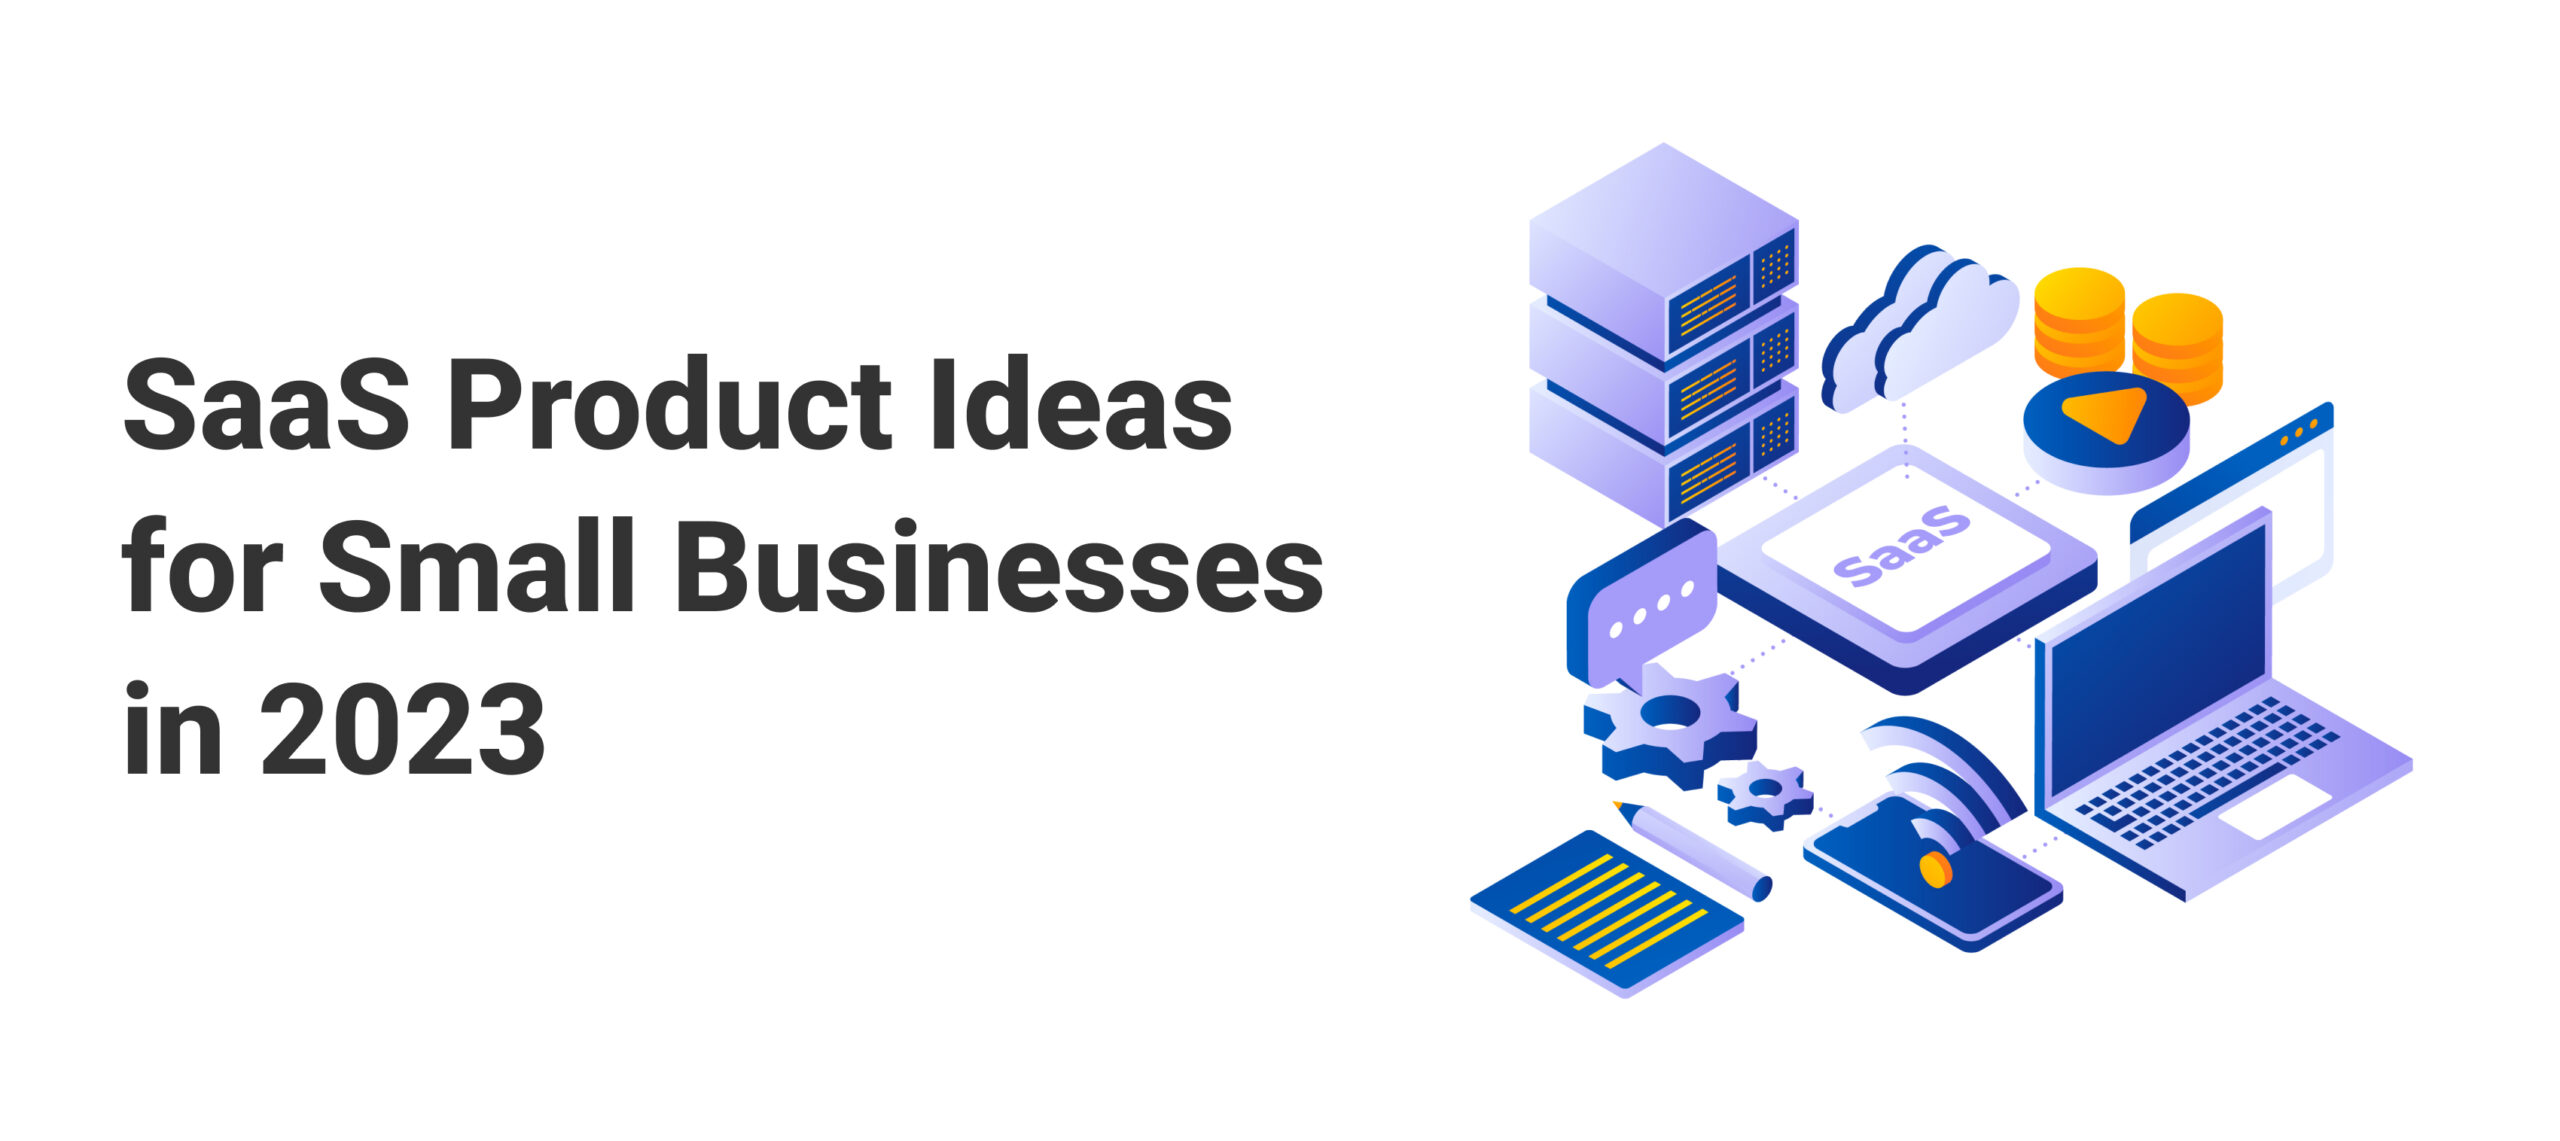  The Ultimate List of SaaS Product Ideas for Small Businesses in 2023